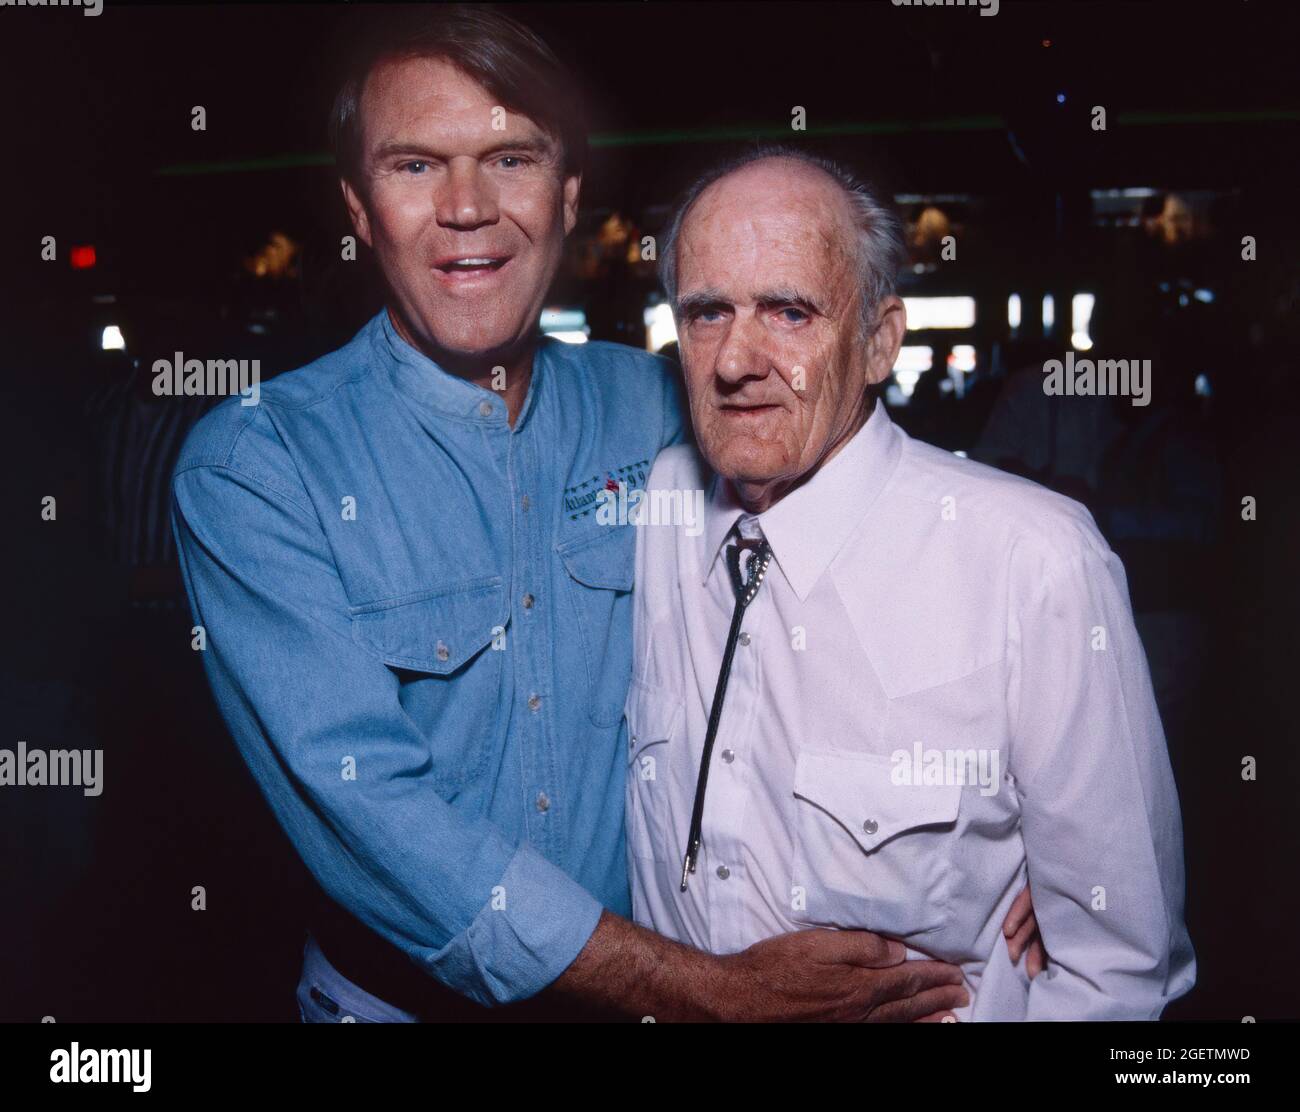 Glen Campbell and his uncle William Eugene 'Boo' Campbell share a moment at Glen Campbell's surprise 60th birthday party in Branson, Missouri on April 21, 1996. Glen Campbell's actual birth date was April 22, 1936. He died of complications from Alzheimer's disease on August 8, 2017. 'Uncle Boo' is credited by Glen Campbell for teaching him to play guitar as a boy. Stock Photo